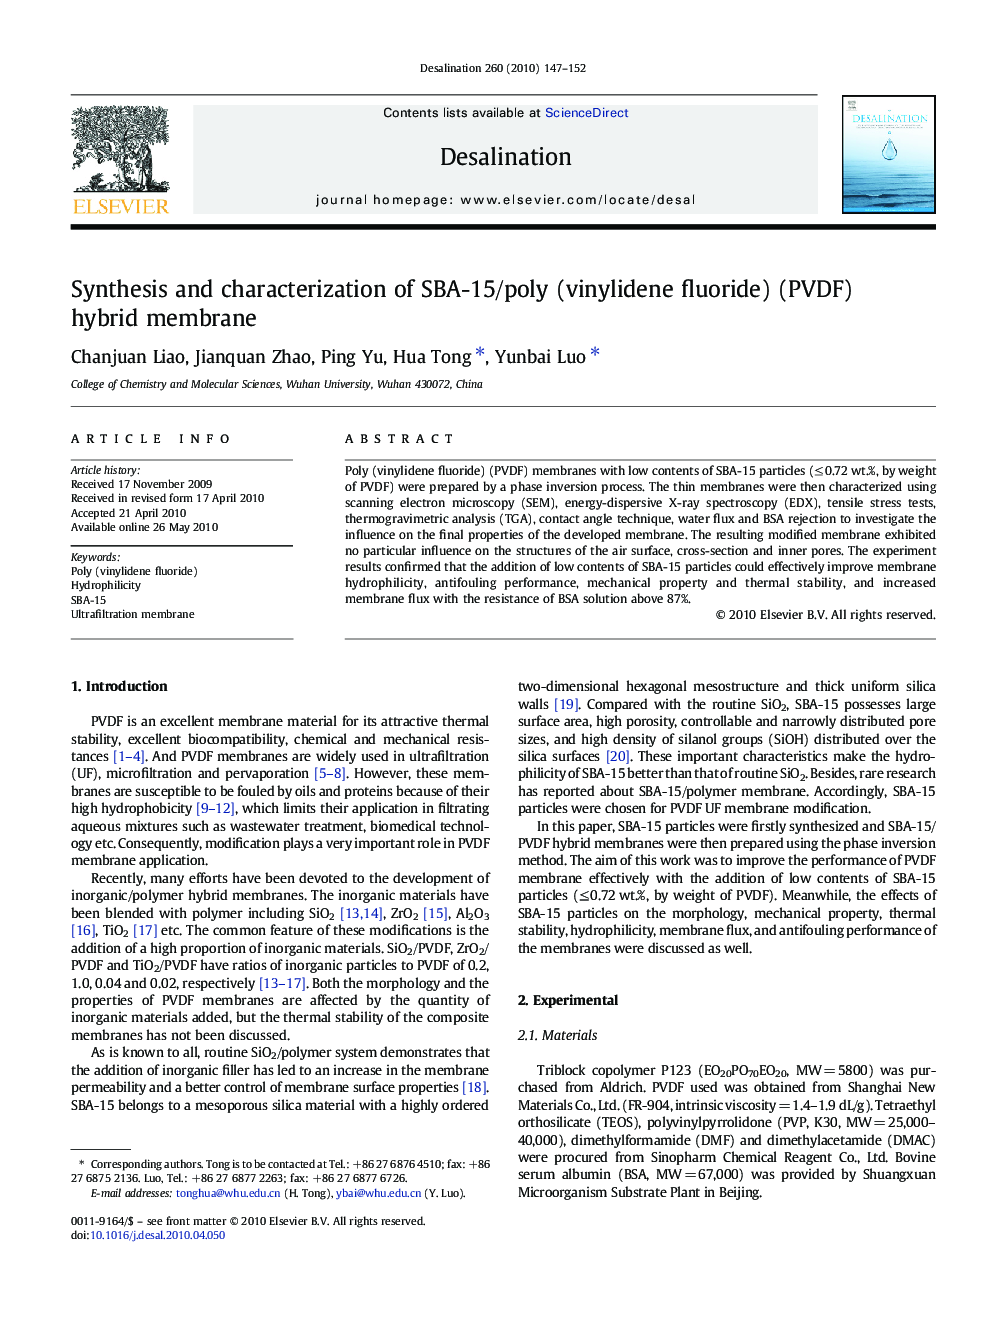 Synthesis and characterization of SBA-15/poly (vinylidene fluoride) (PVDF) hybrid membrane